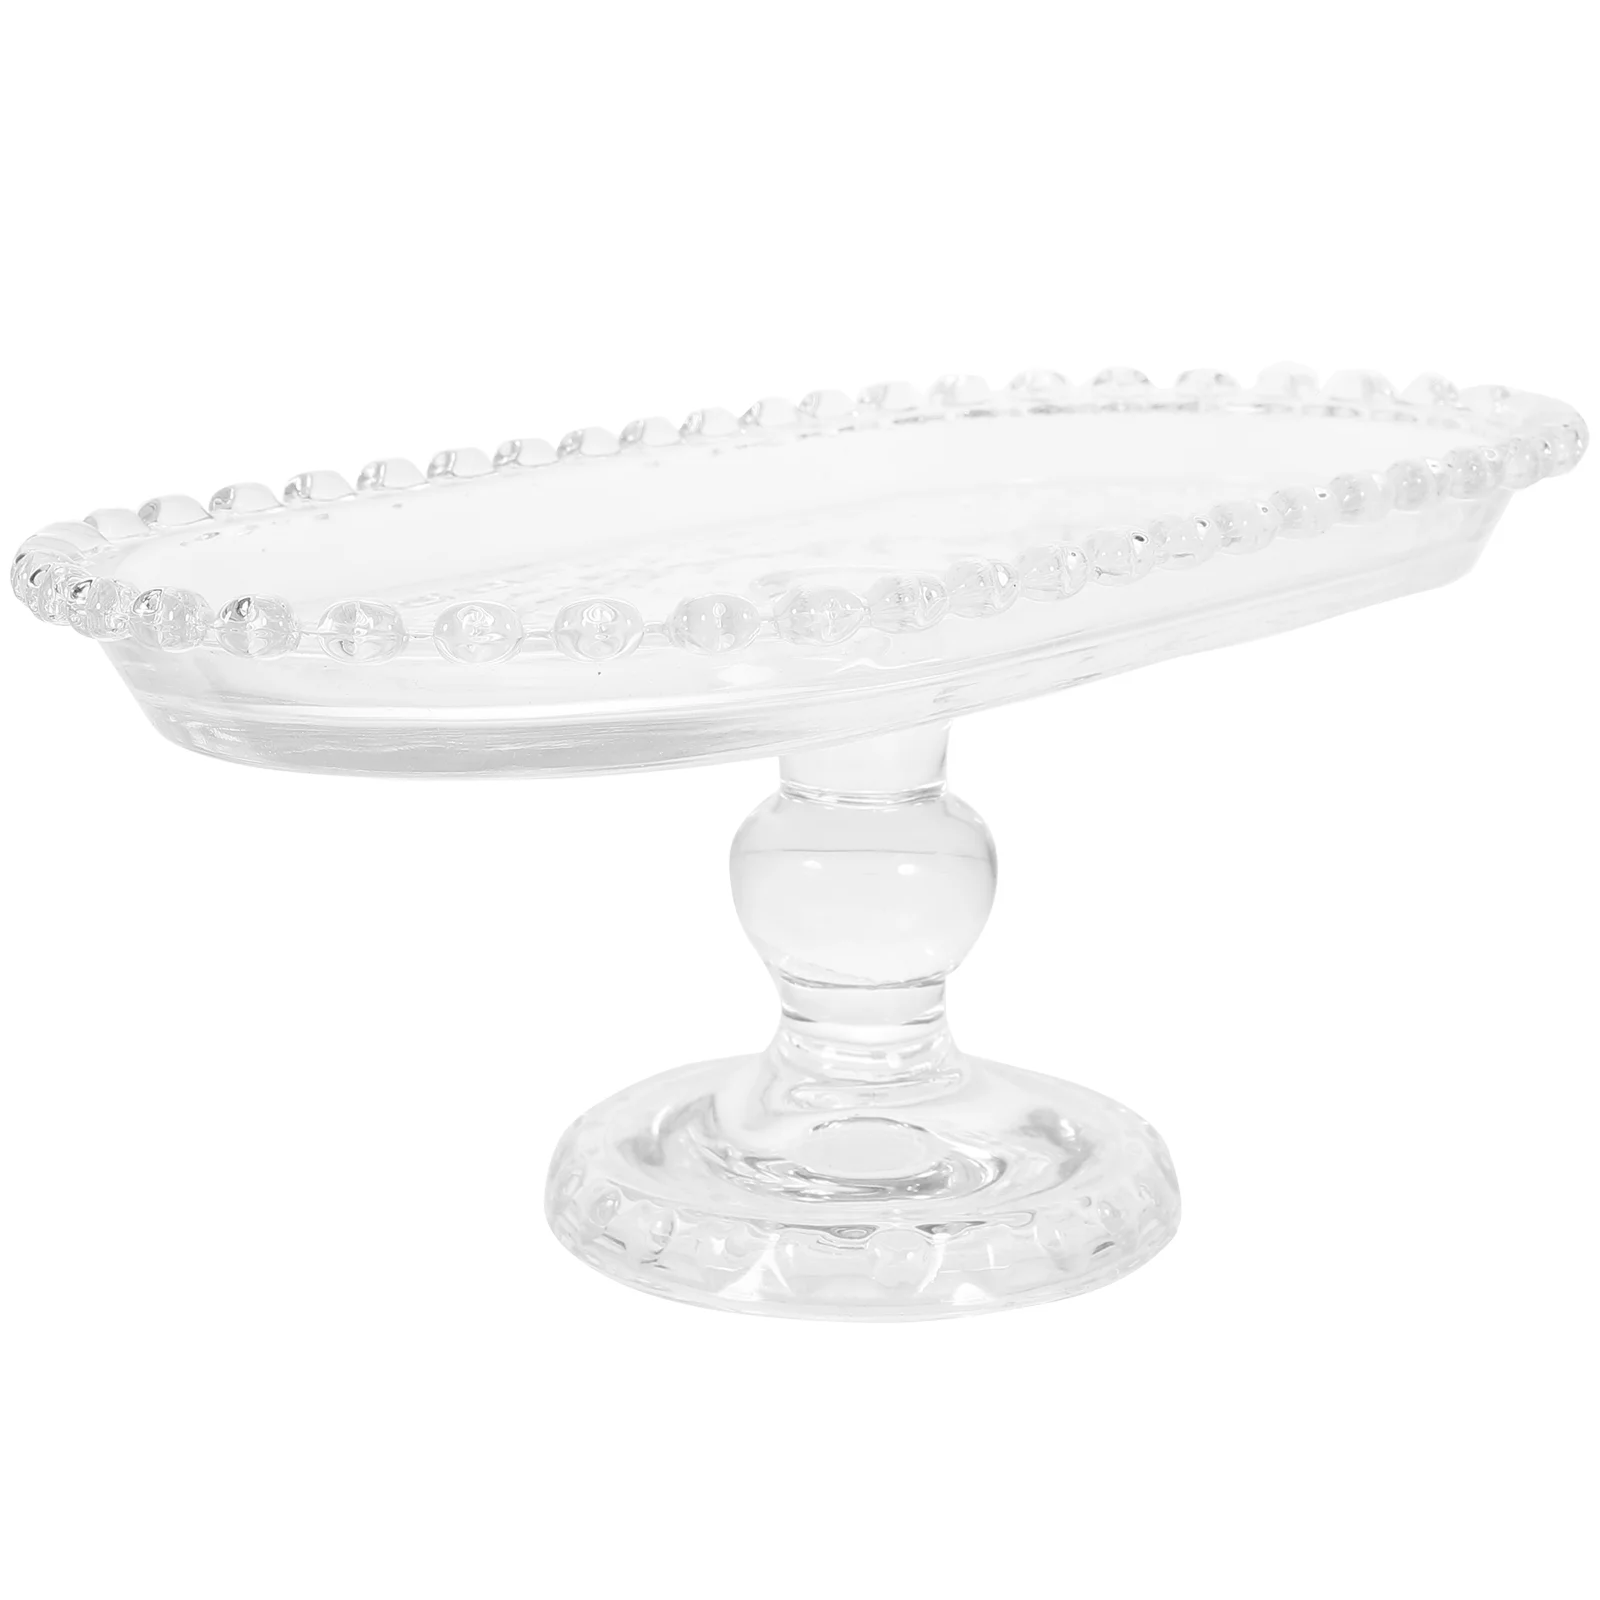 

Glass Dessert Stand Multipurpose Snacks Plate Footed Bowl Cupcake Holders Oval Candy Fruit Serving Appetizer Tray